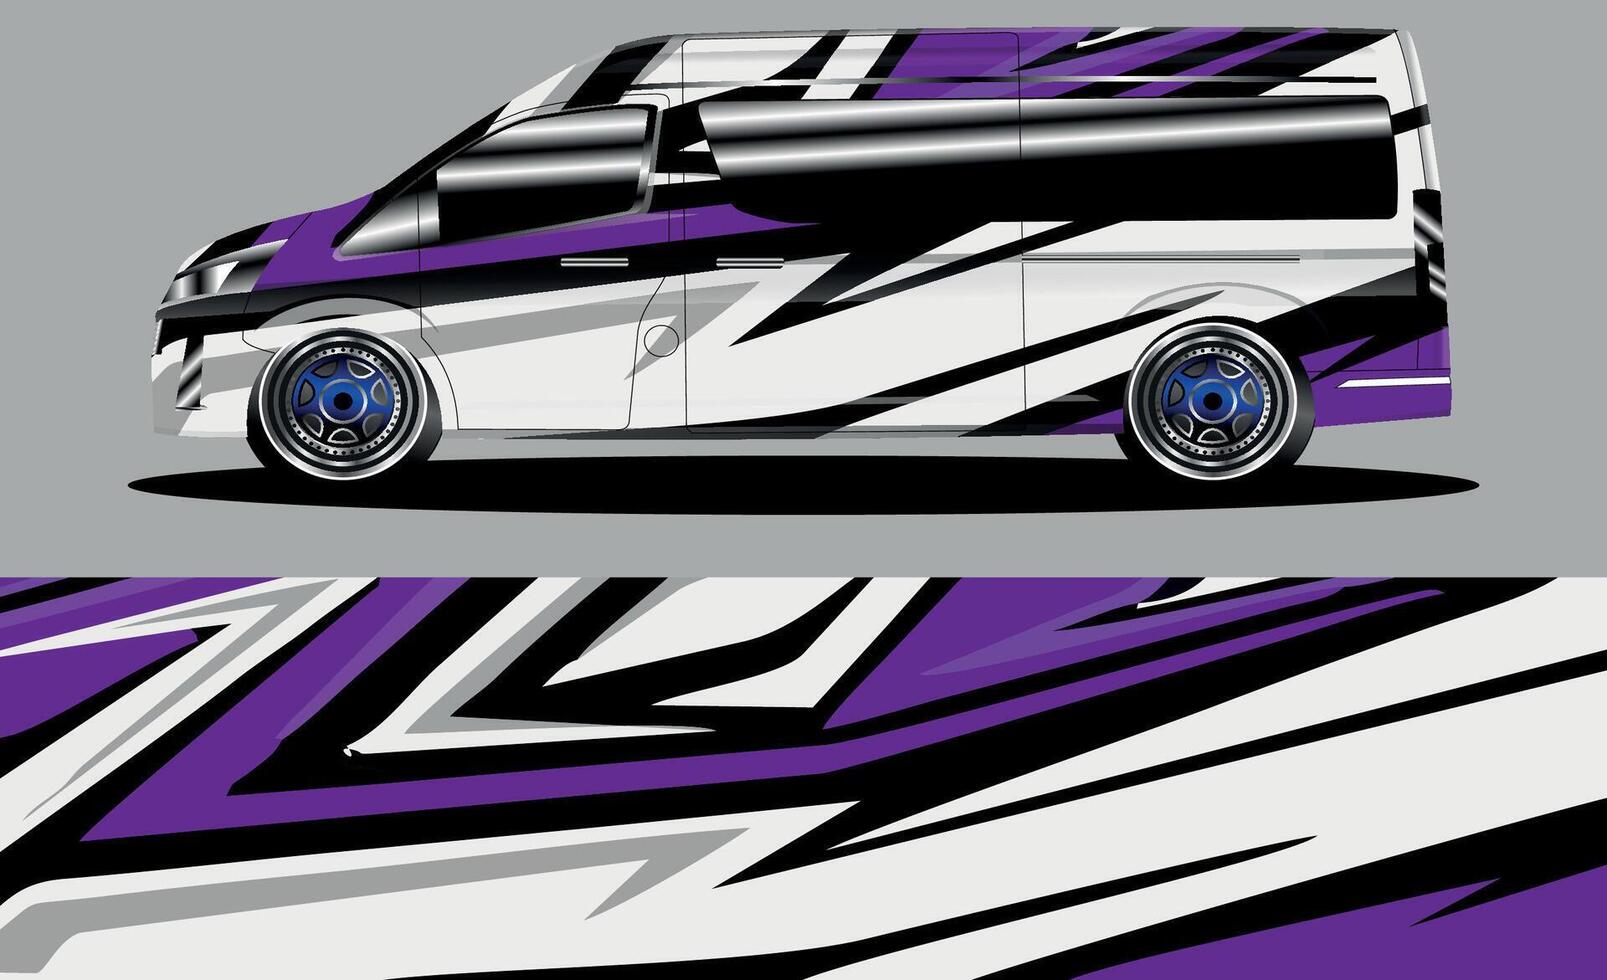 Van wrap design. Wrap, sticker and decal design for company vector